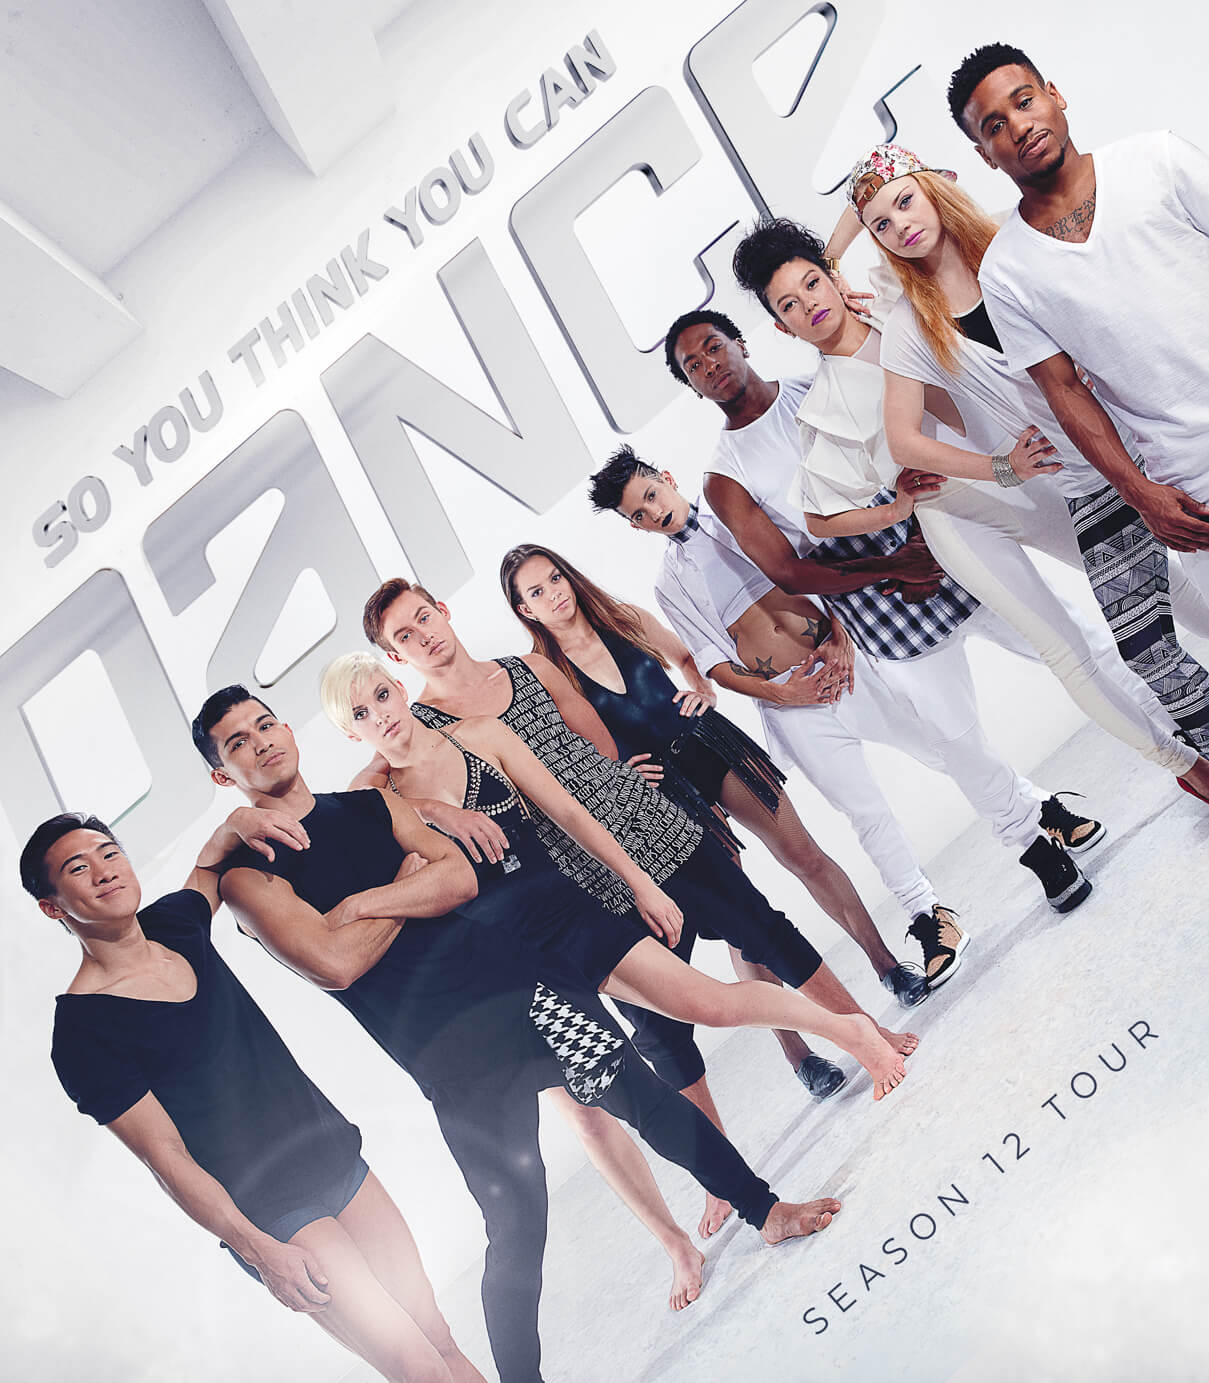 Front cover design in the 2015 tour book for Season 12 of So You Think You Can Dance TV program which aired on Fox